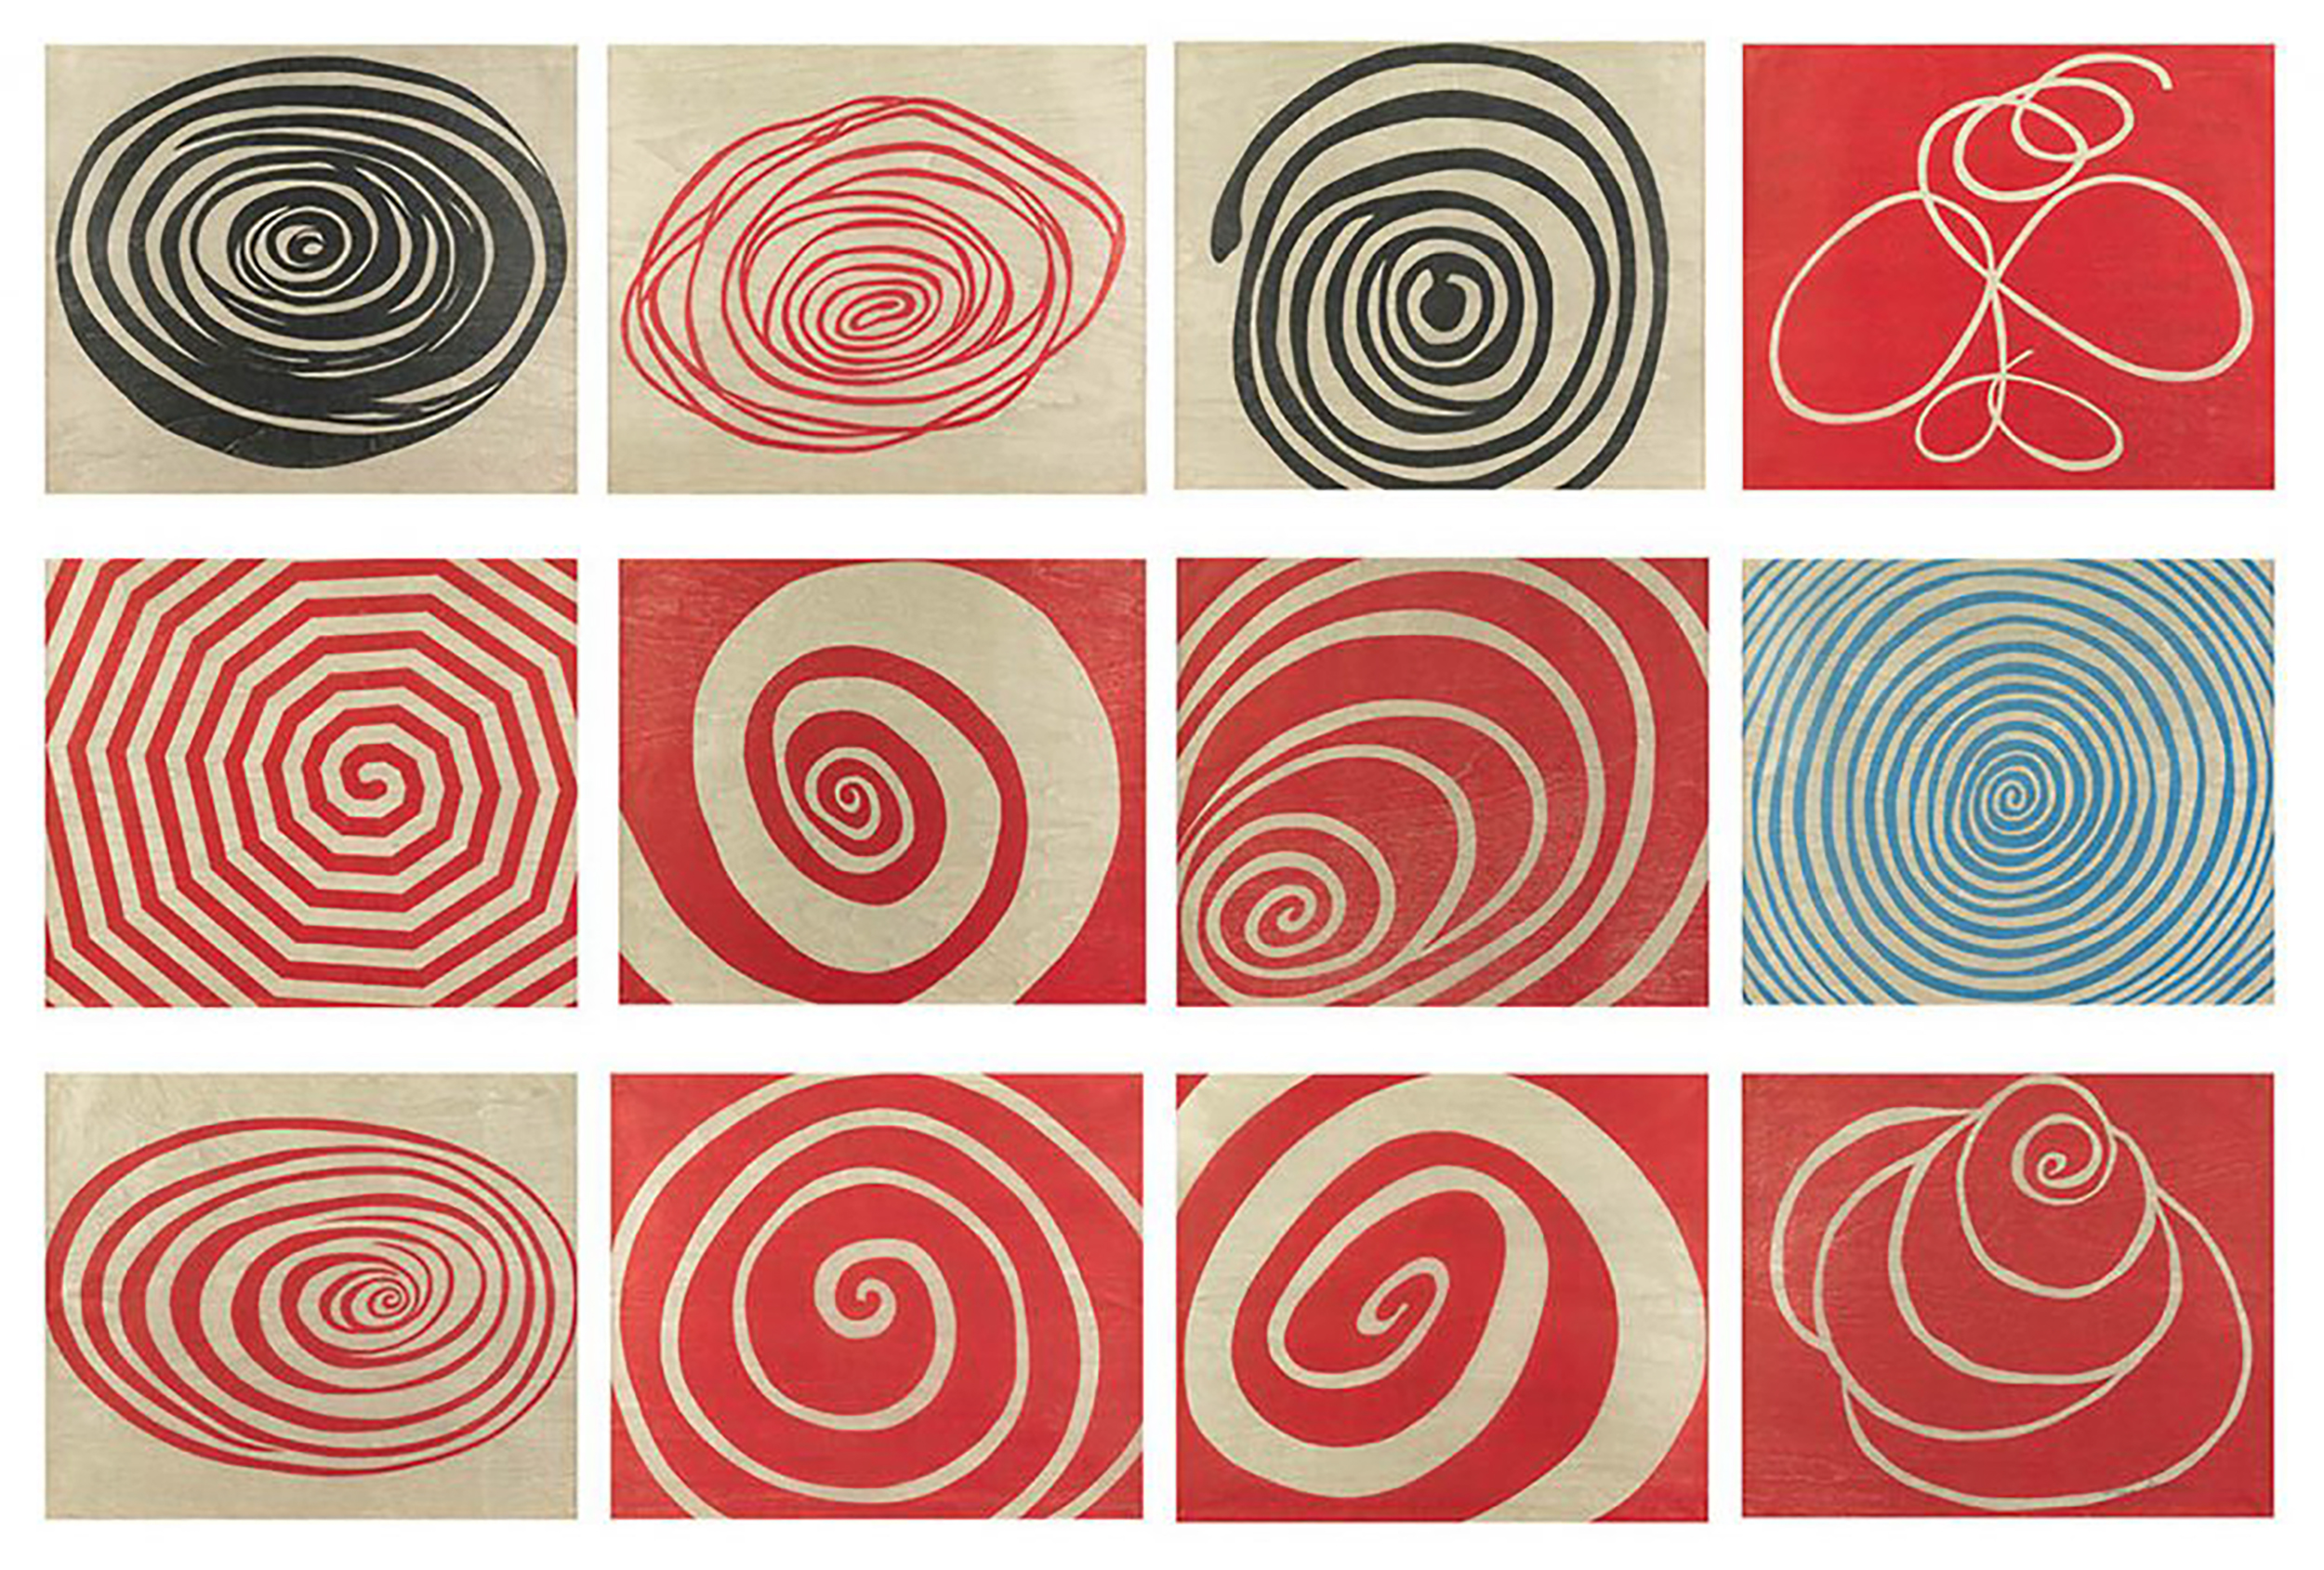 Louise Bourgeois - The Fabric Works - Exhibitions - Cheim Read